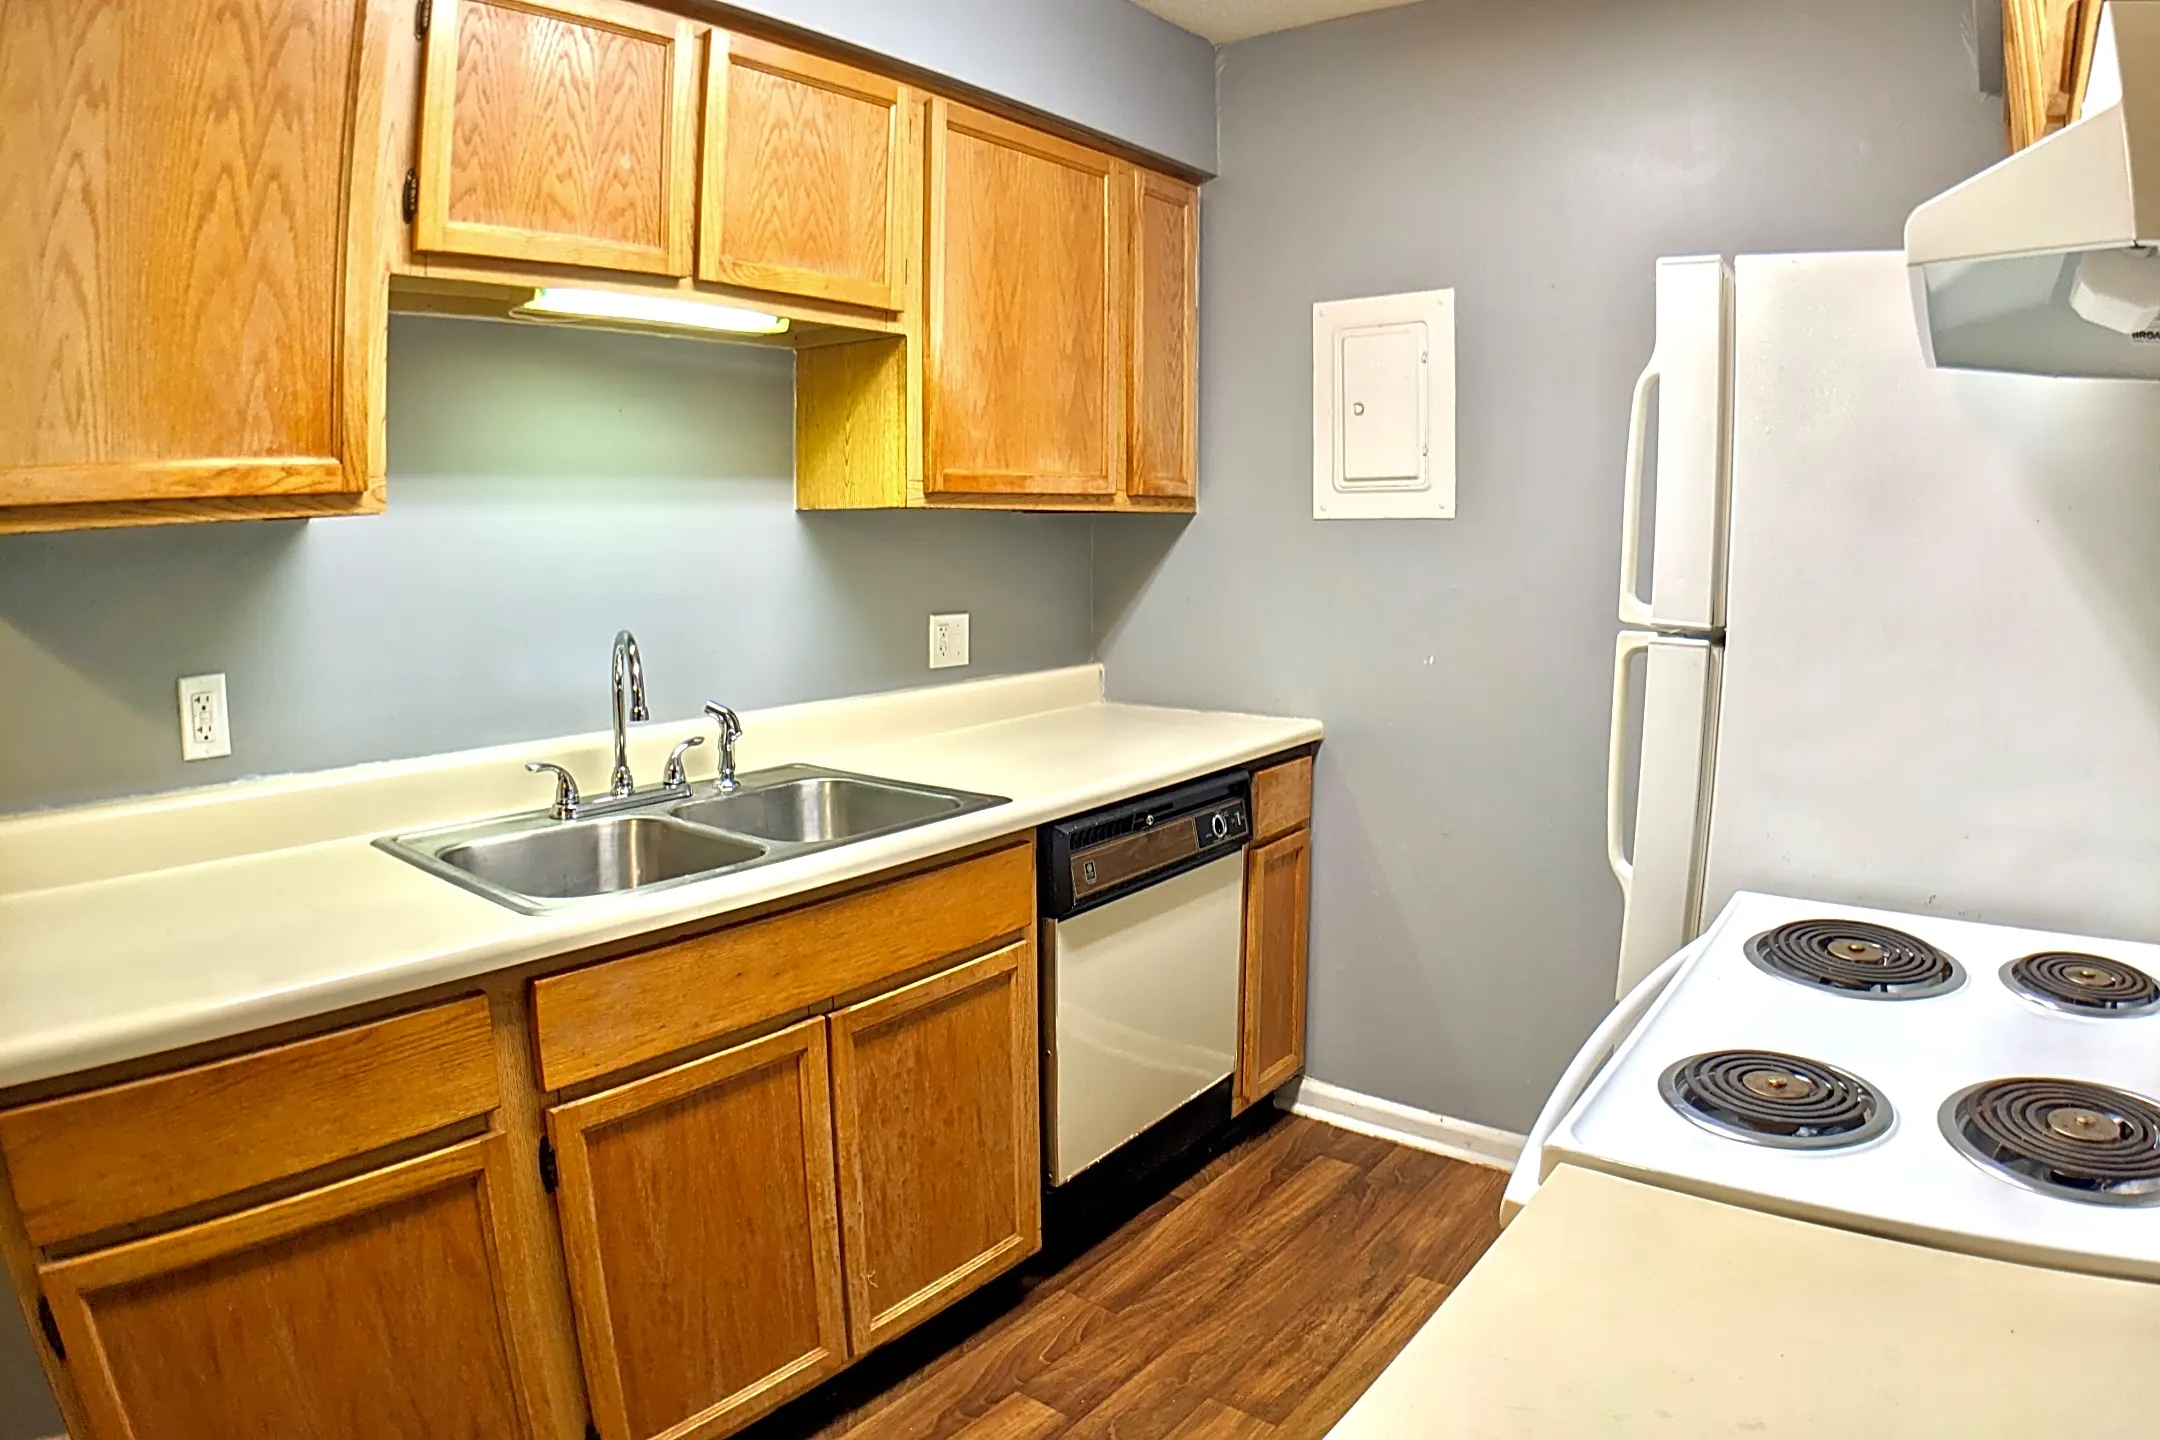 Kitchen - Southern Pines Apartments - Gulfport, MS